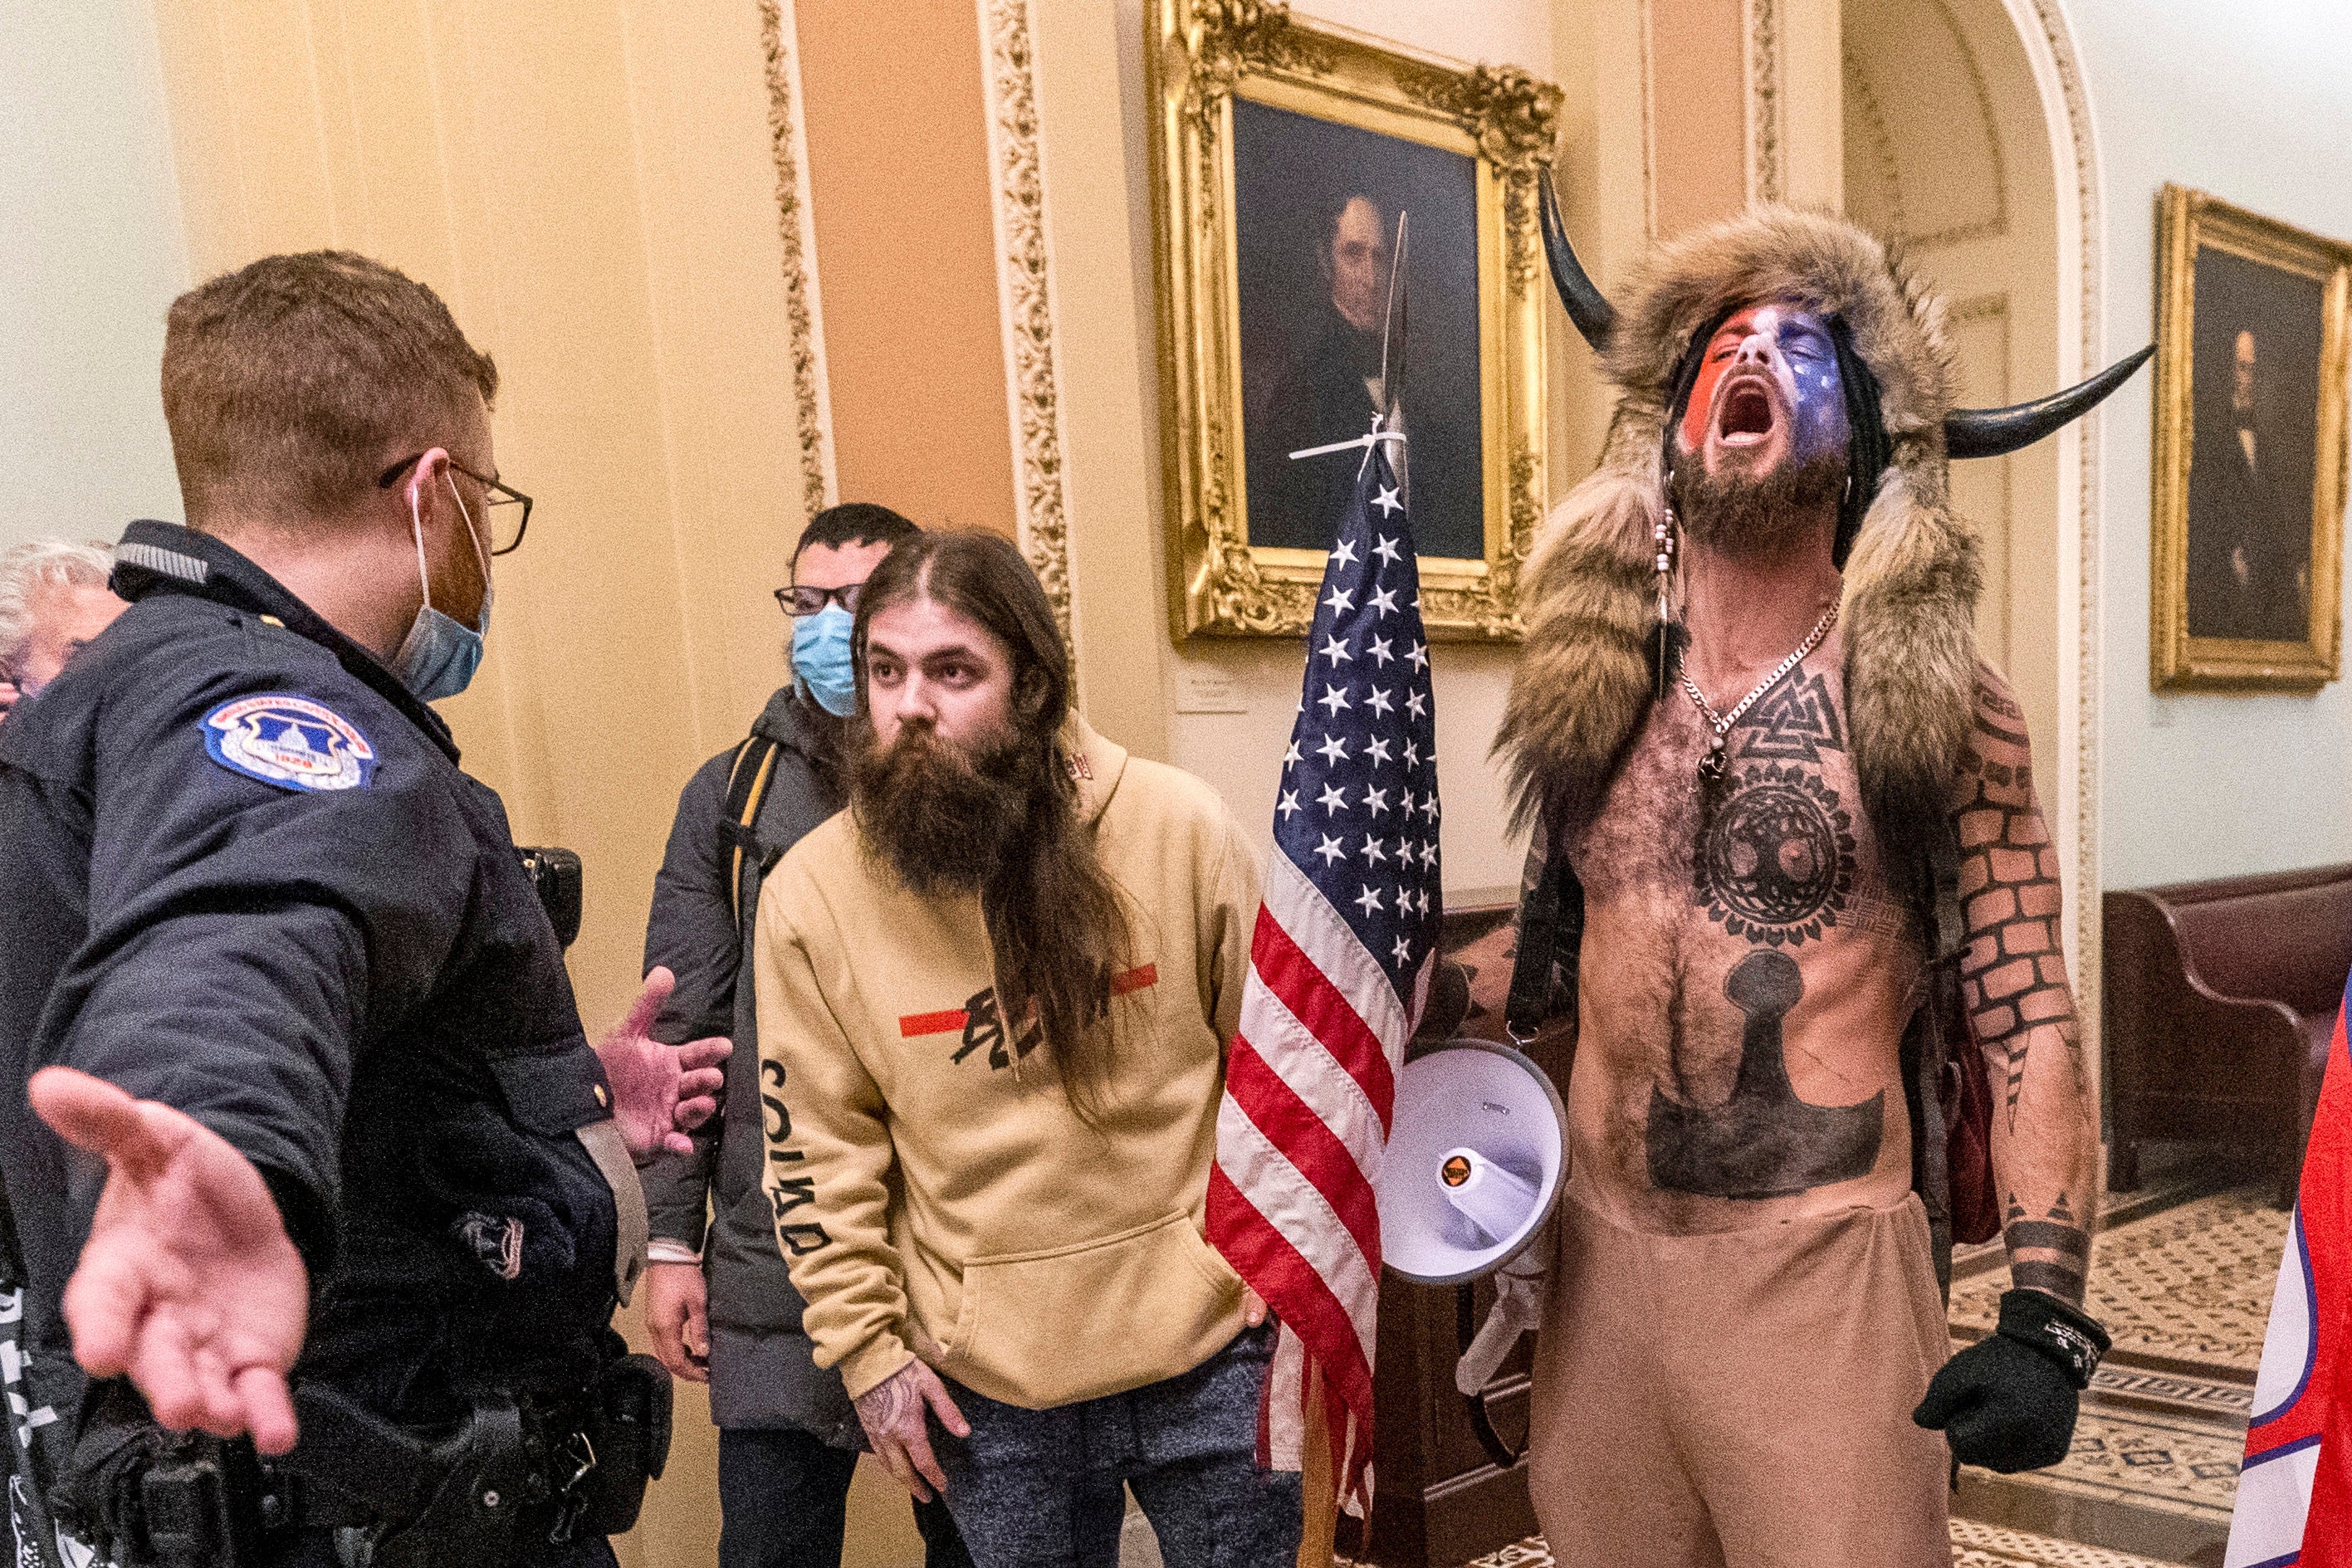 Jacob Chansley screams as he and other intruders maraud through the US Capitol on 6 January, 2021